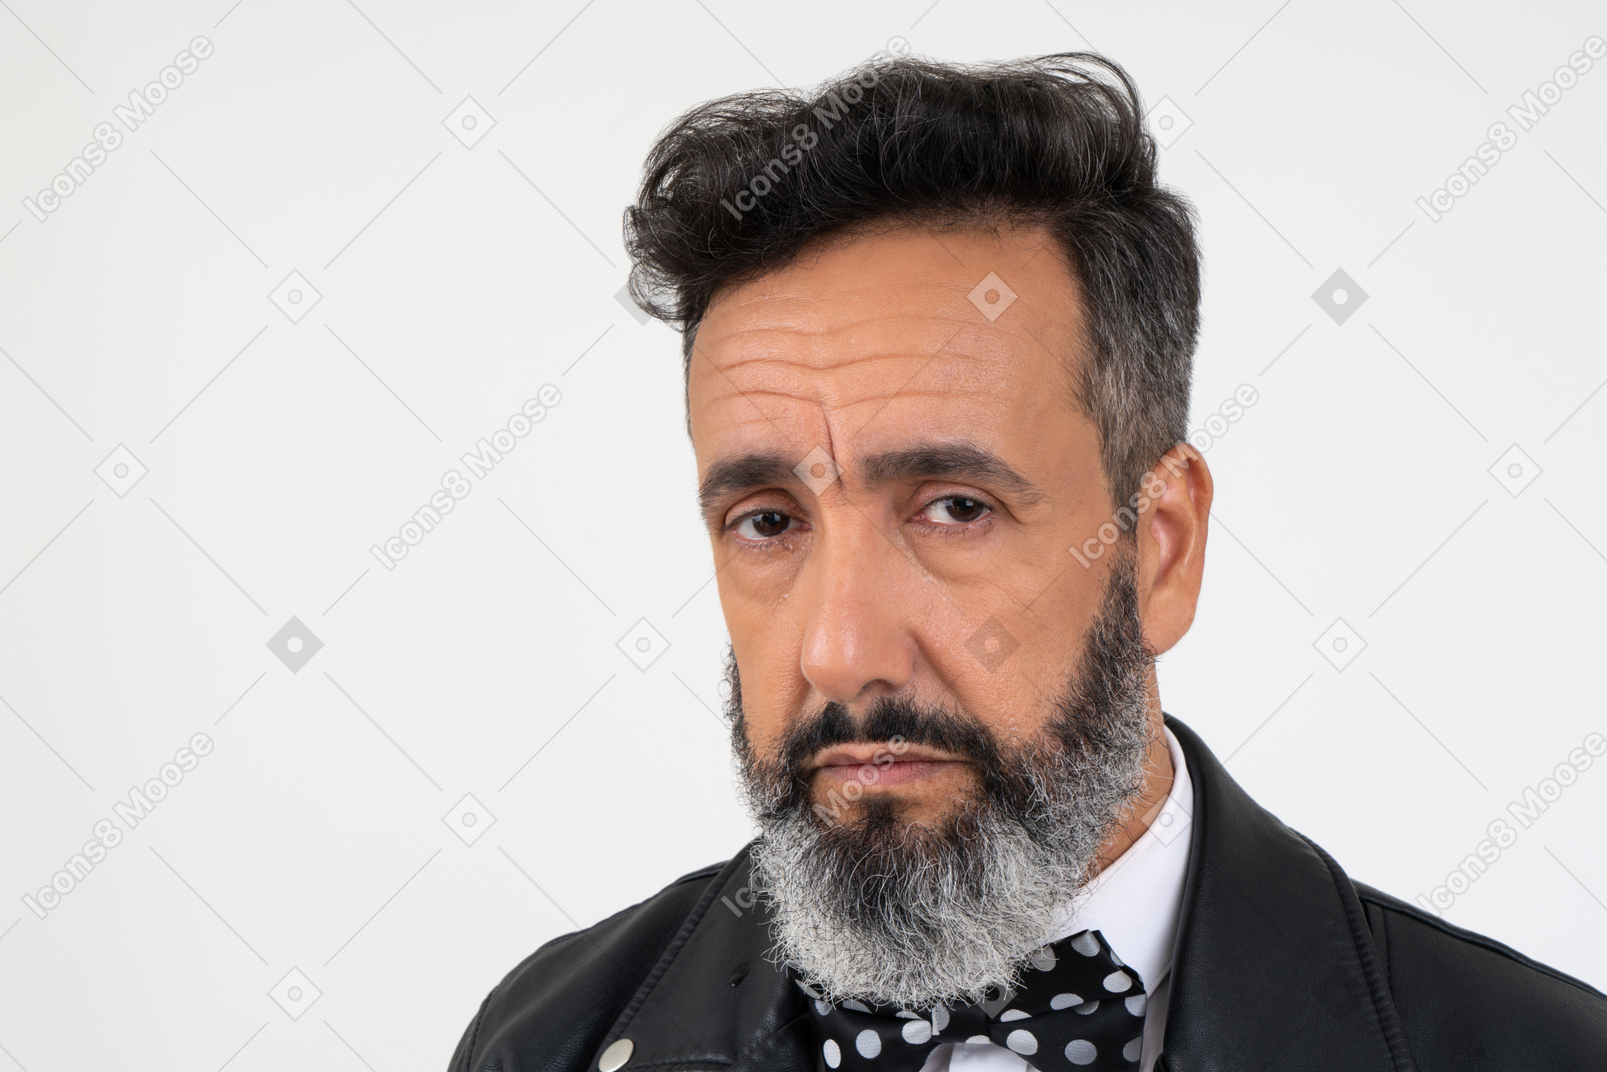 Sad mature man involved in thoughts